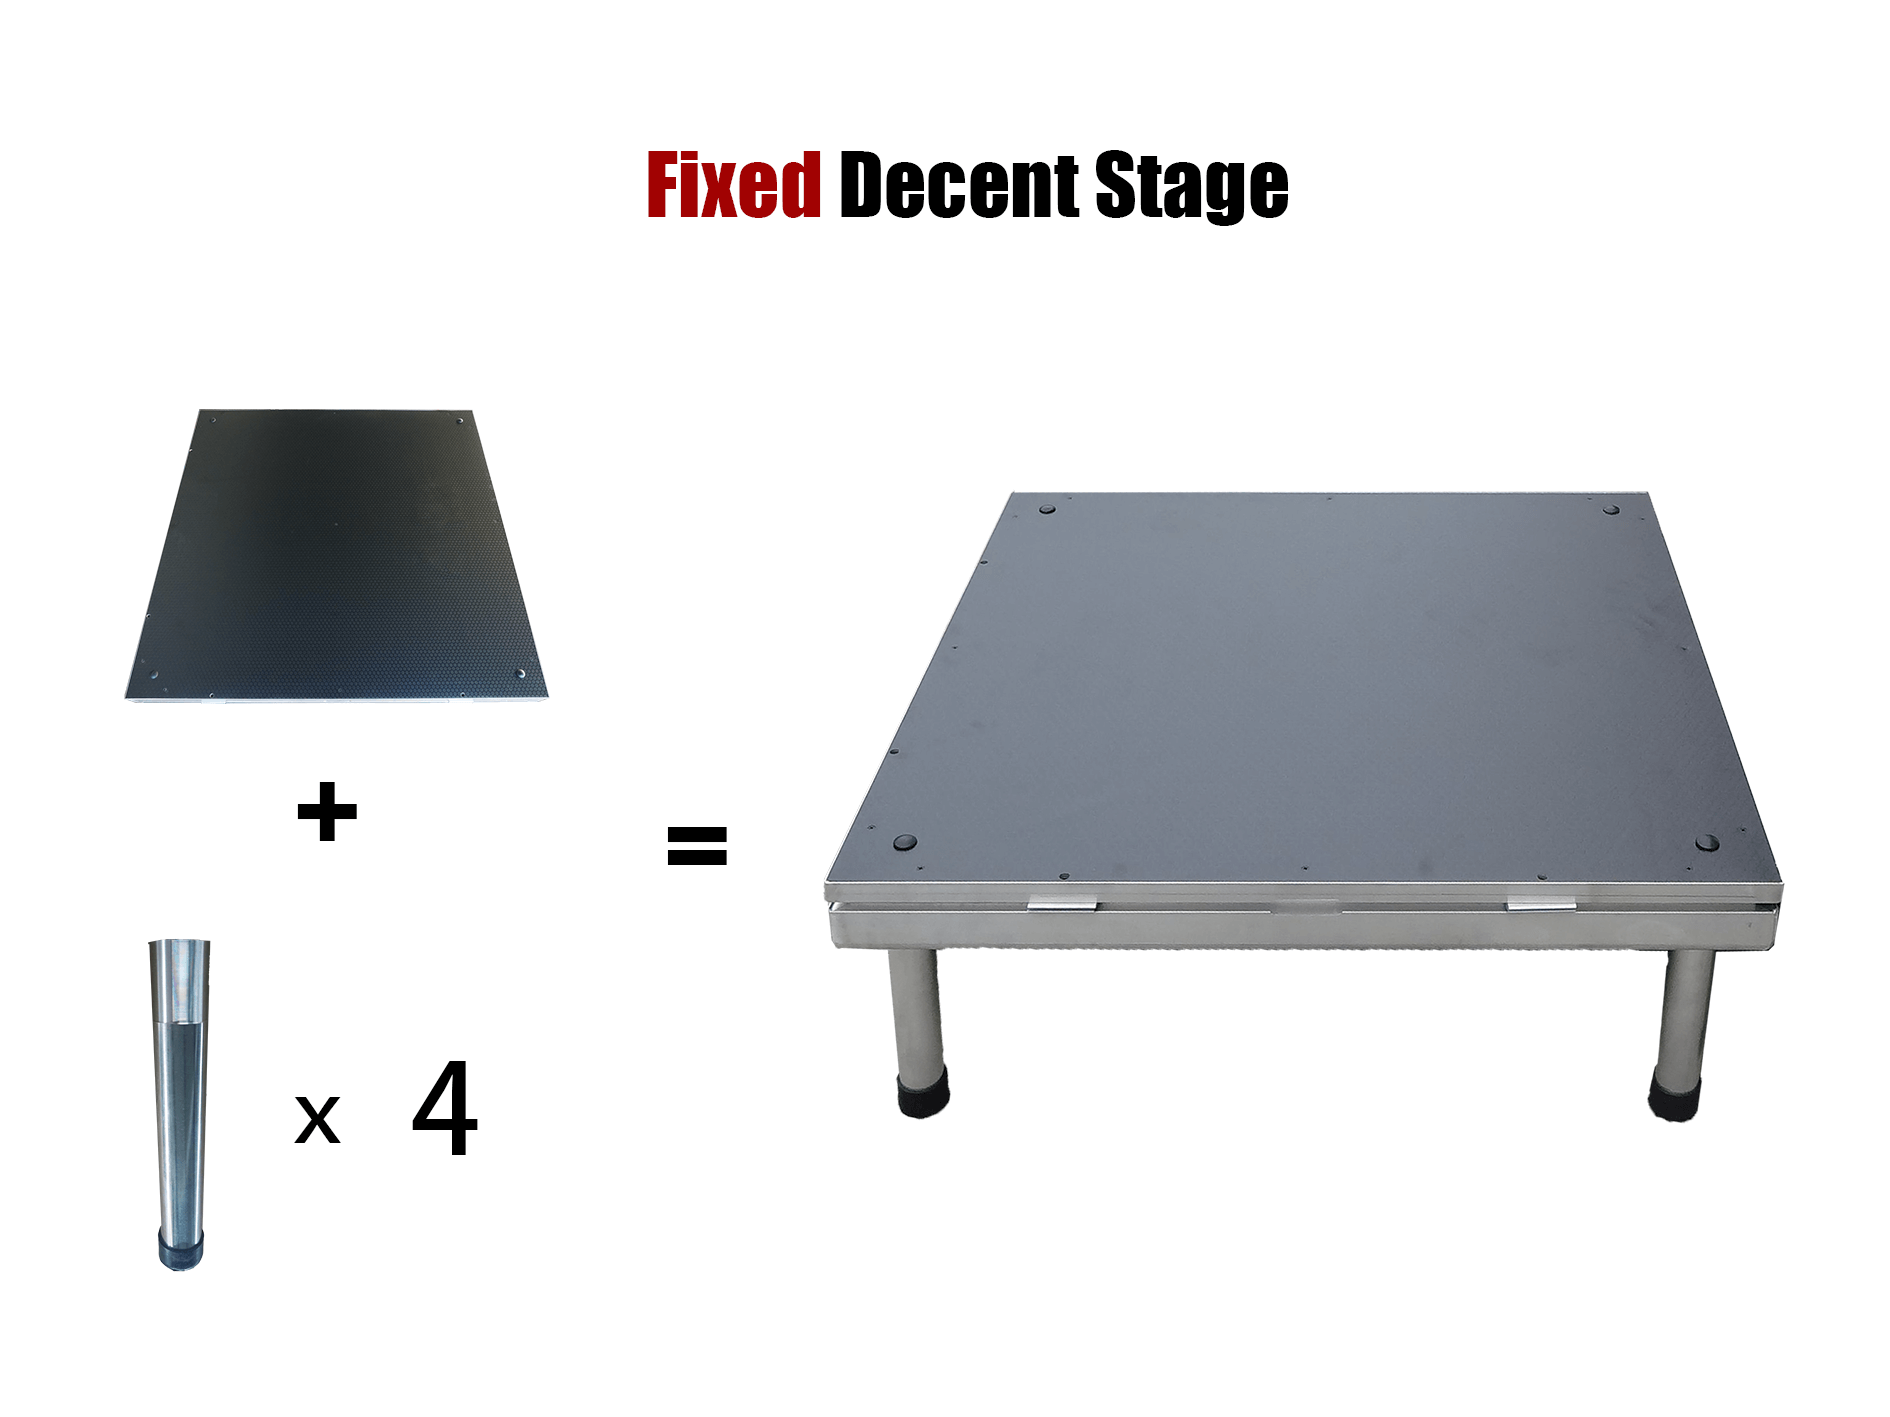 Fixed decent stage